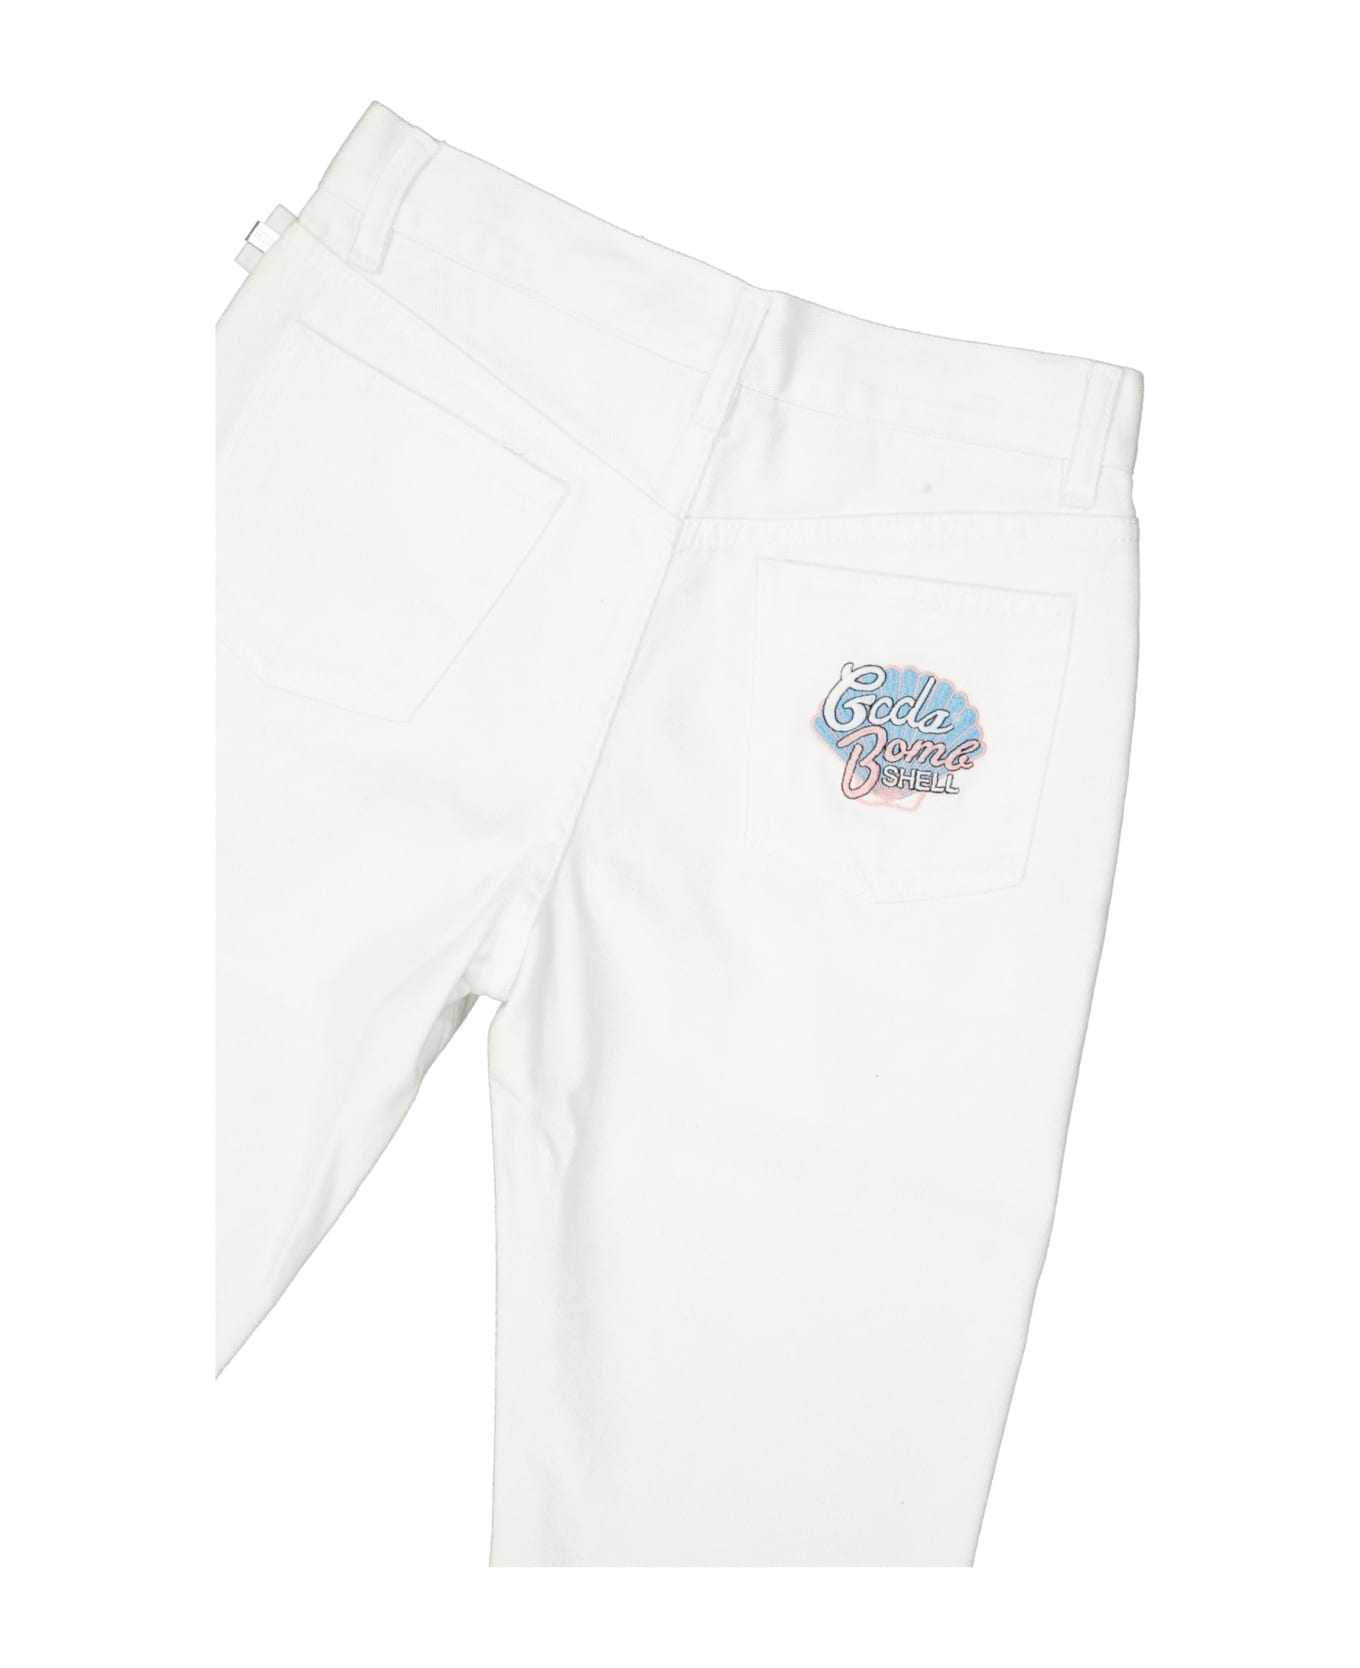 GCDS Cropped Jeans - White